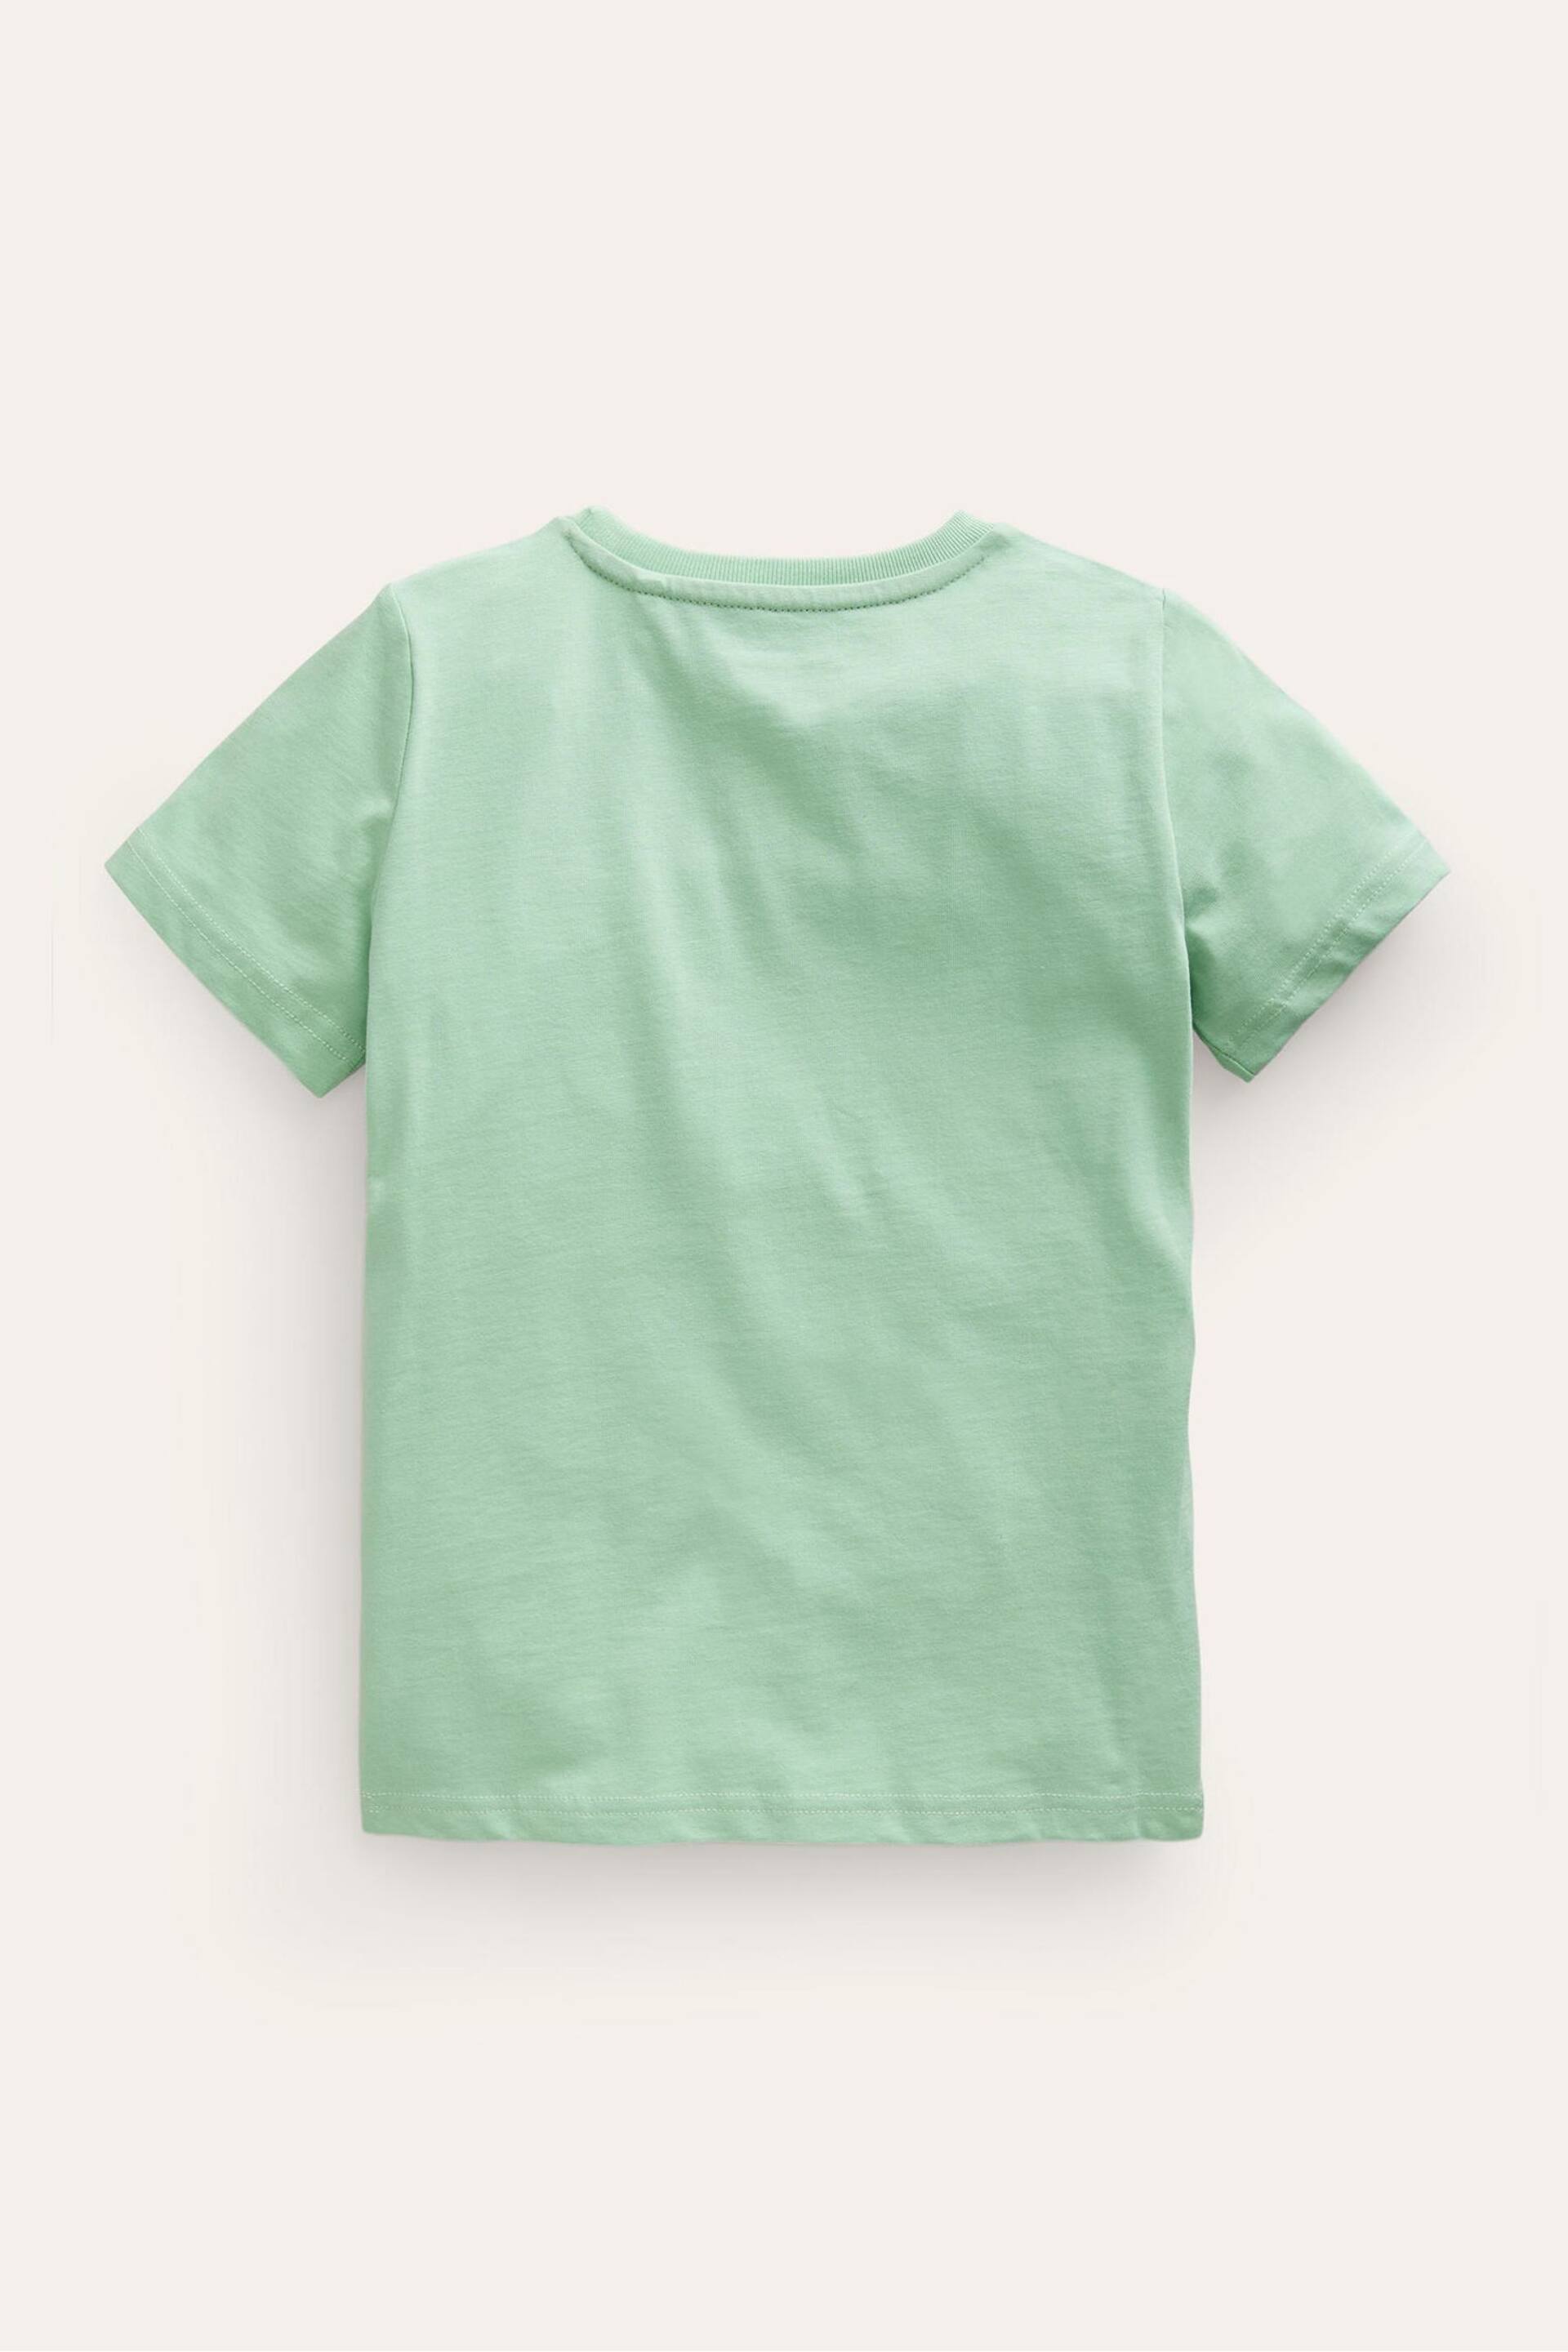 Boden Green Riso Printed T-shirt - Image 2 of 3